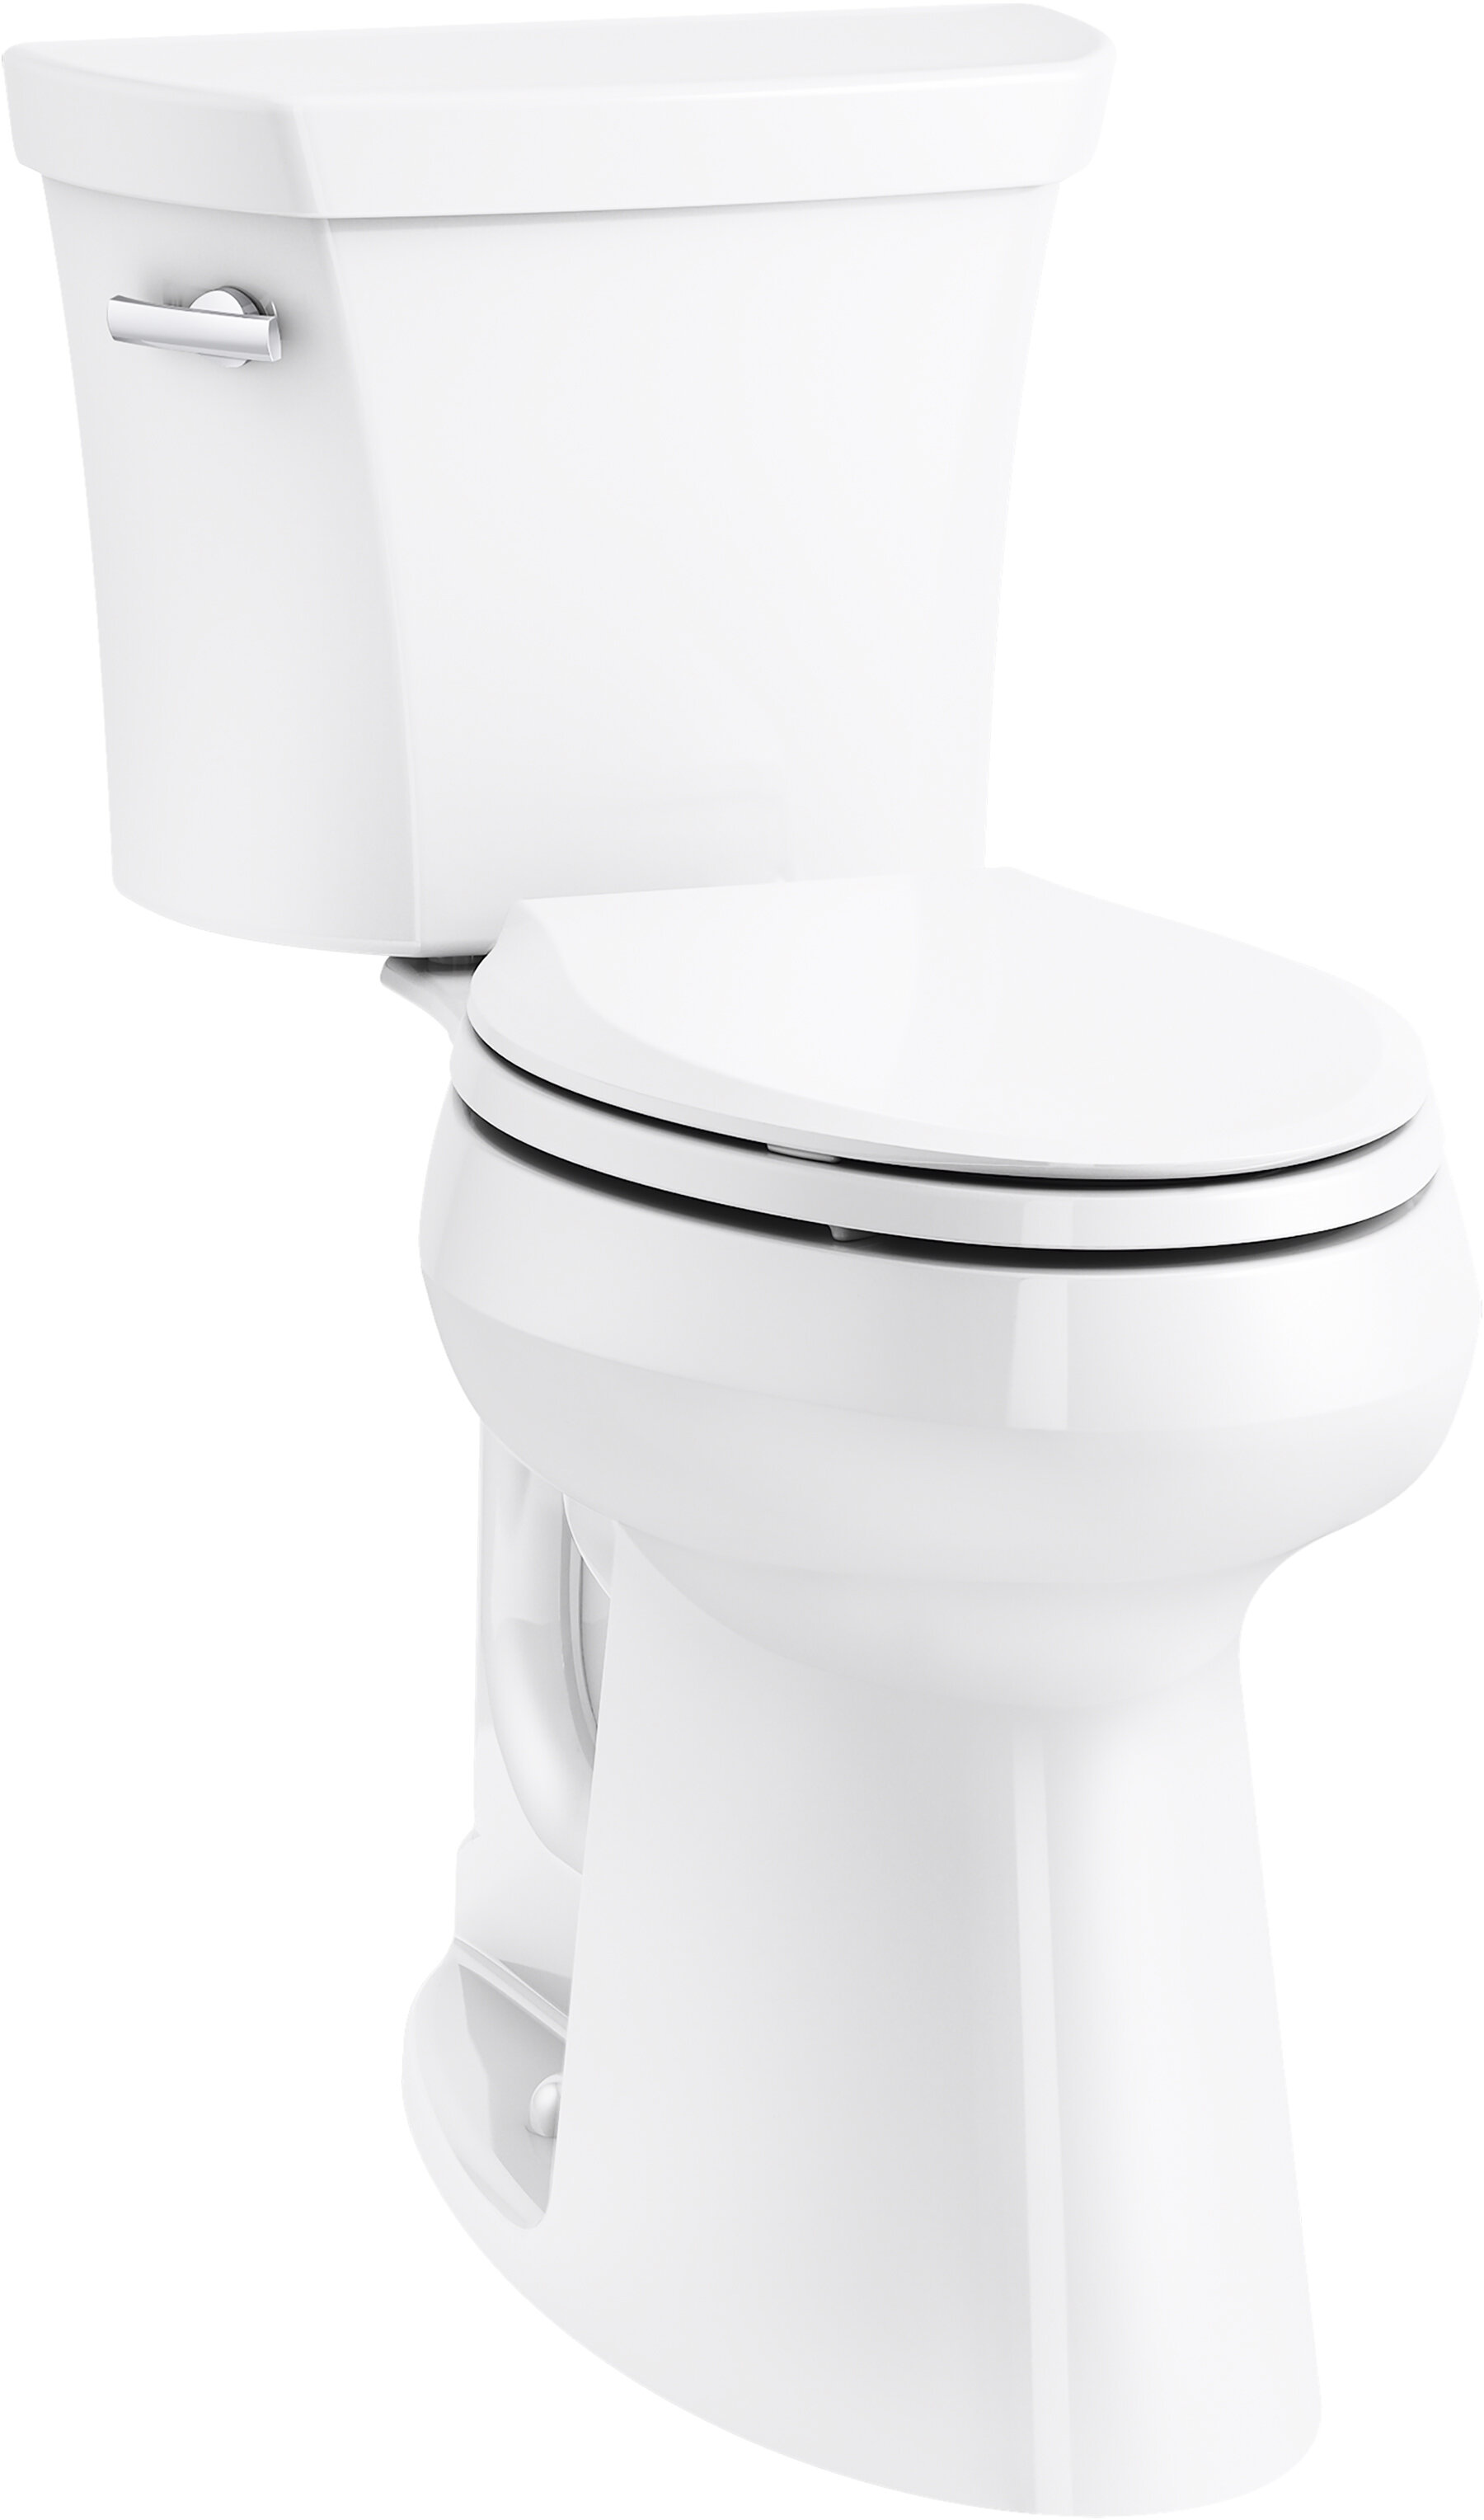 Kohler Highline™ 1.28 GPF (Water Efficient) Elongated Two-Piece Toilet with  High Efficiency Flush (Seat Not Included)  Reviews Perigold